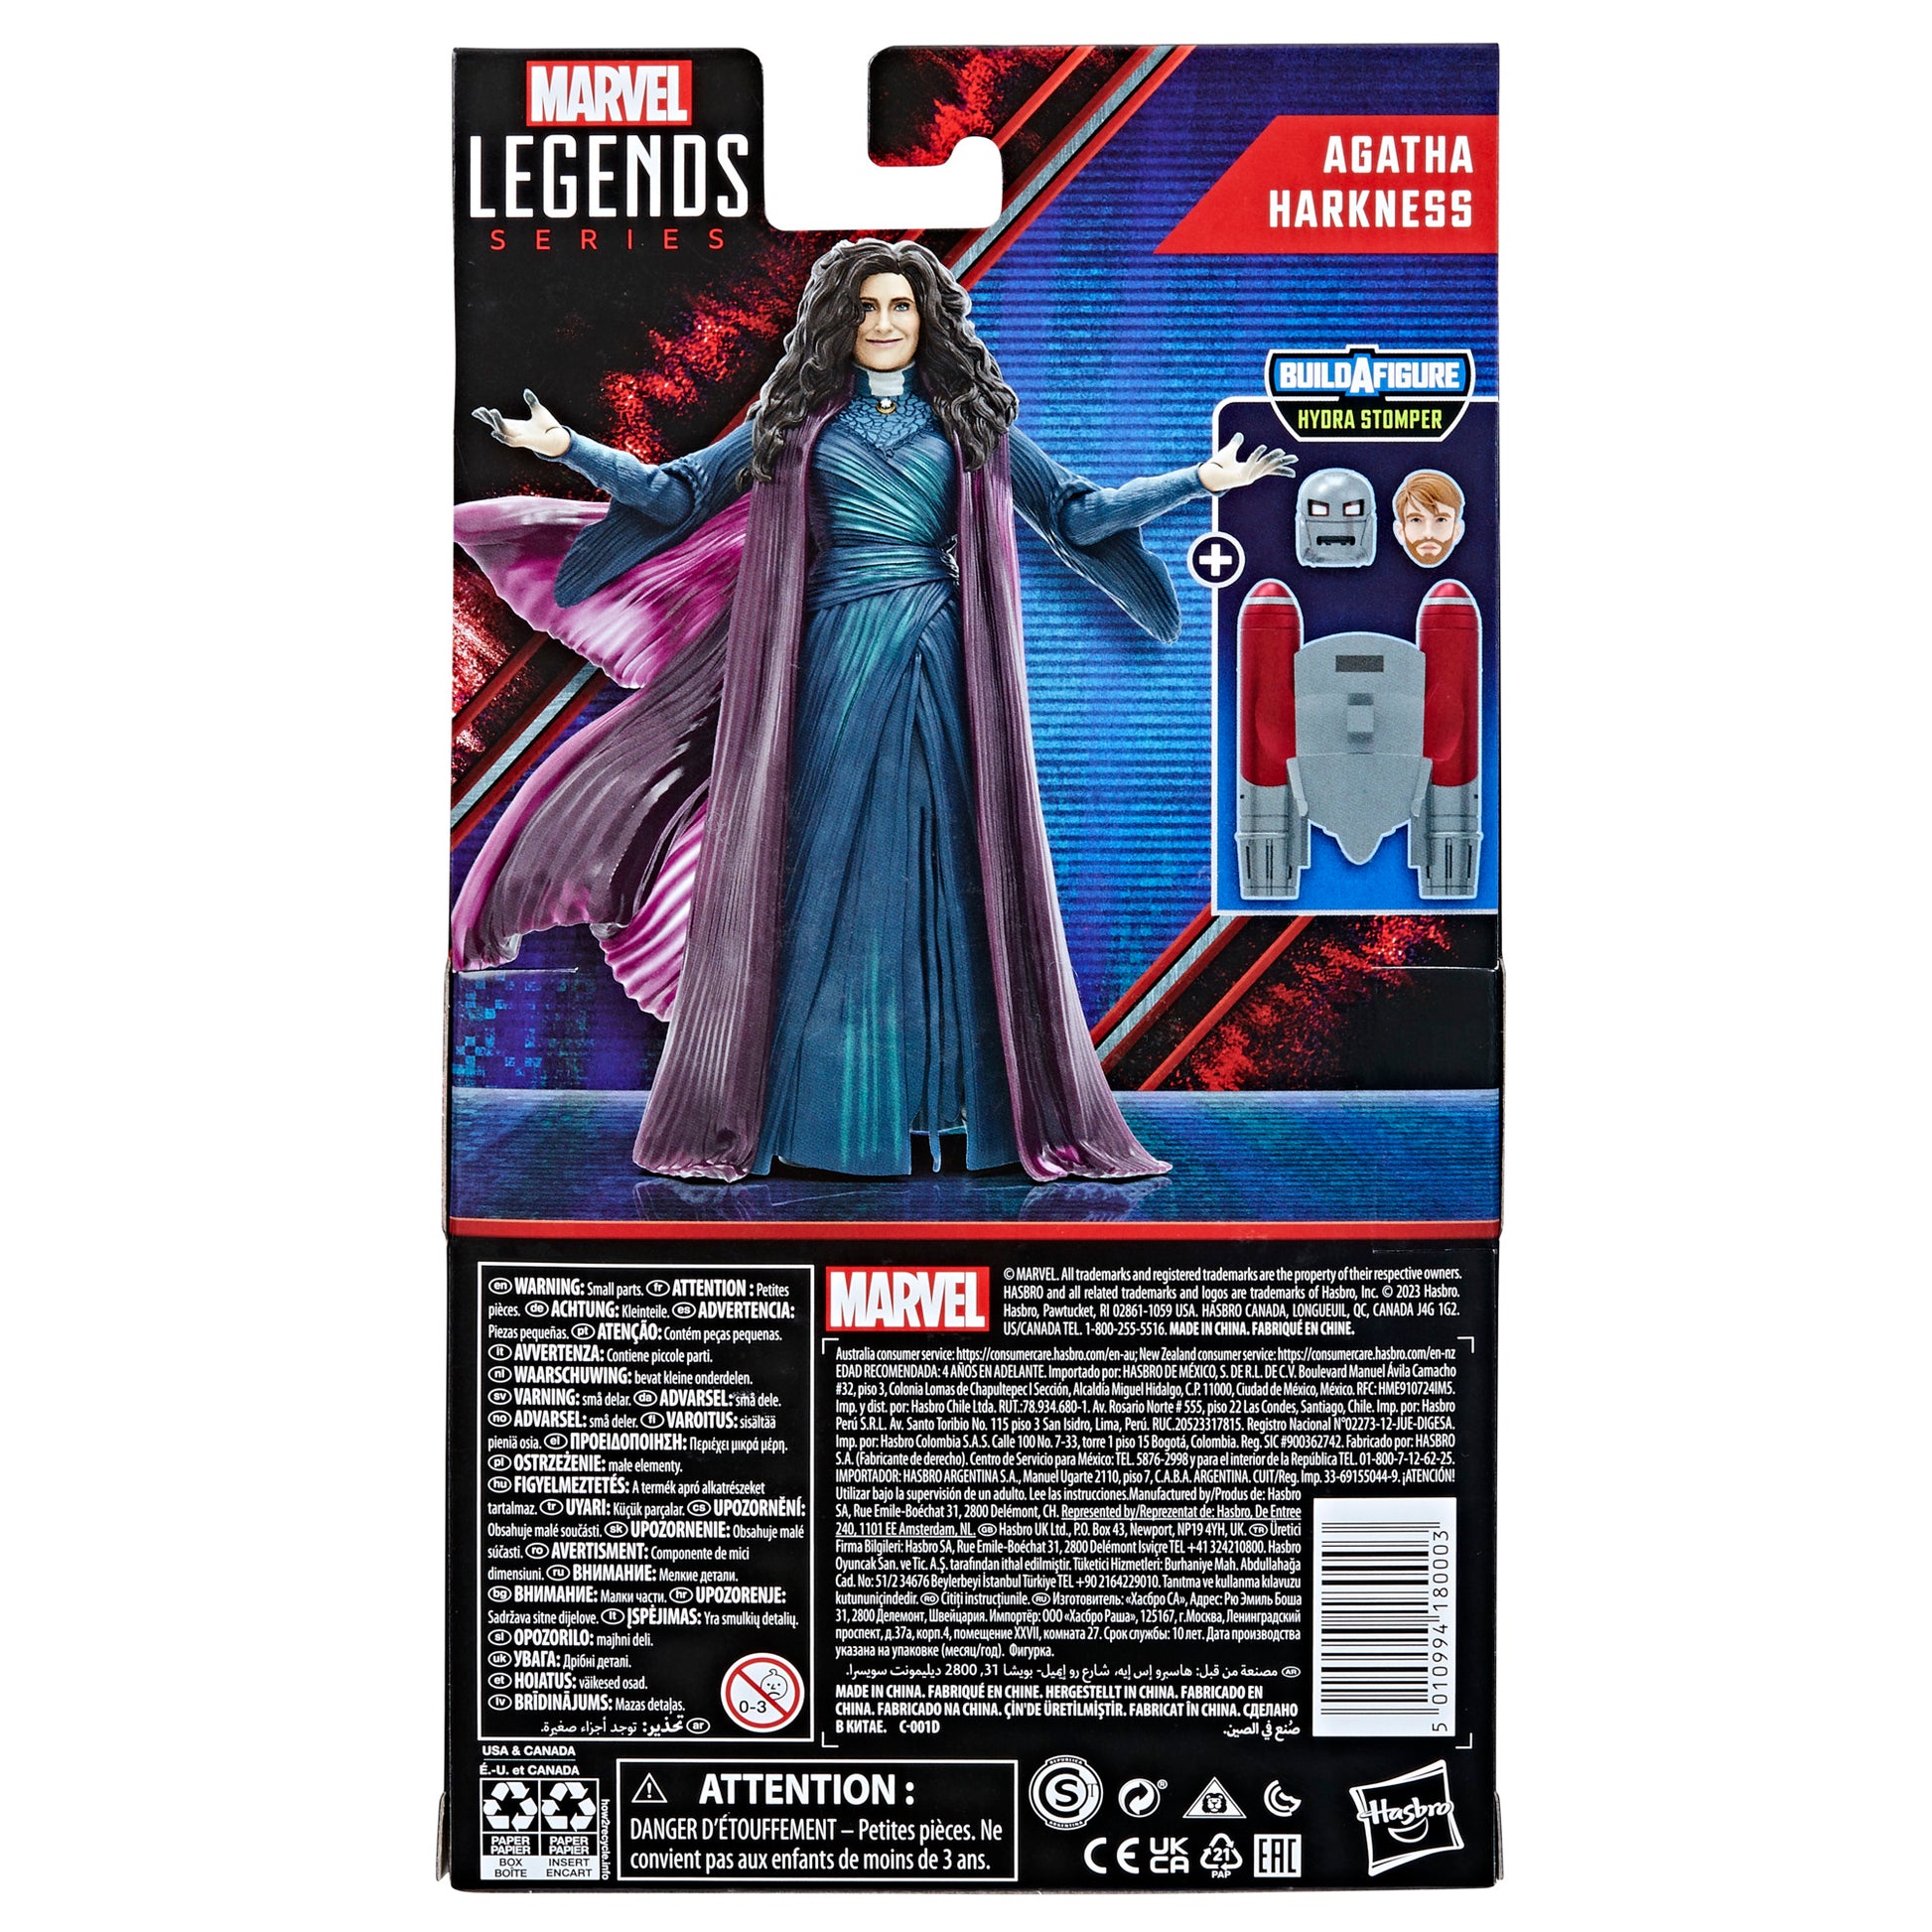 Marvel legends series agatha harkness back view of the box - Heretoserveyou